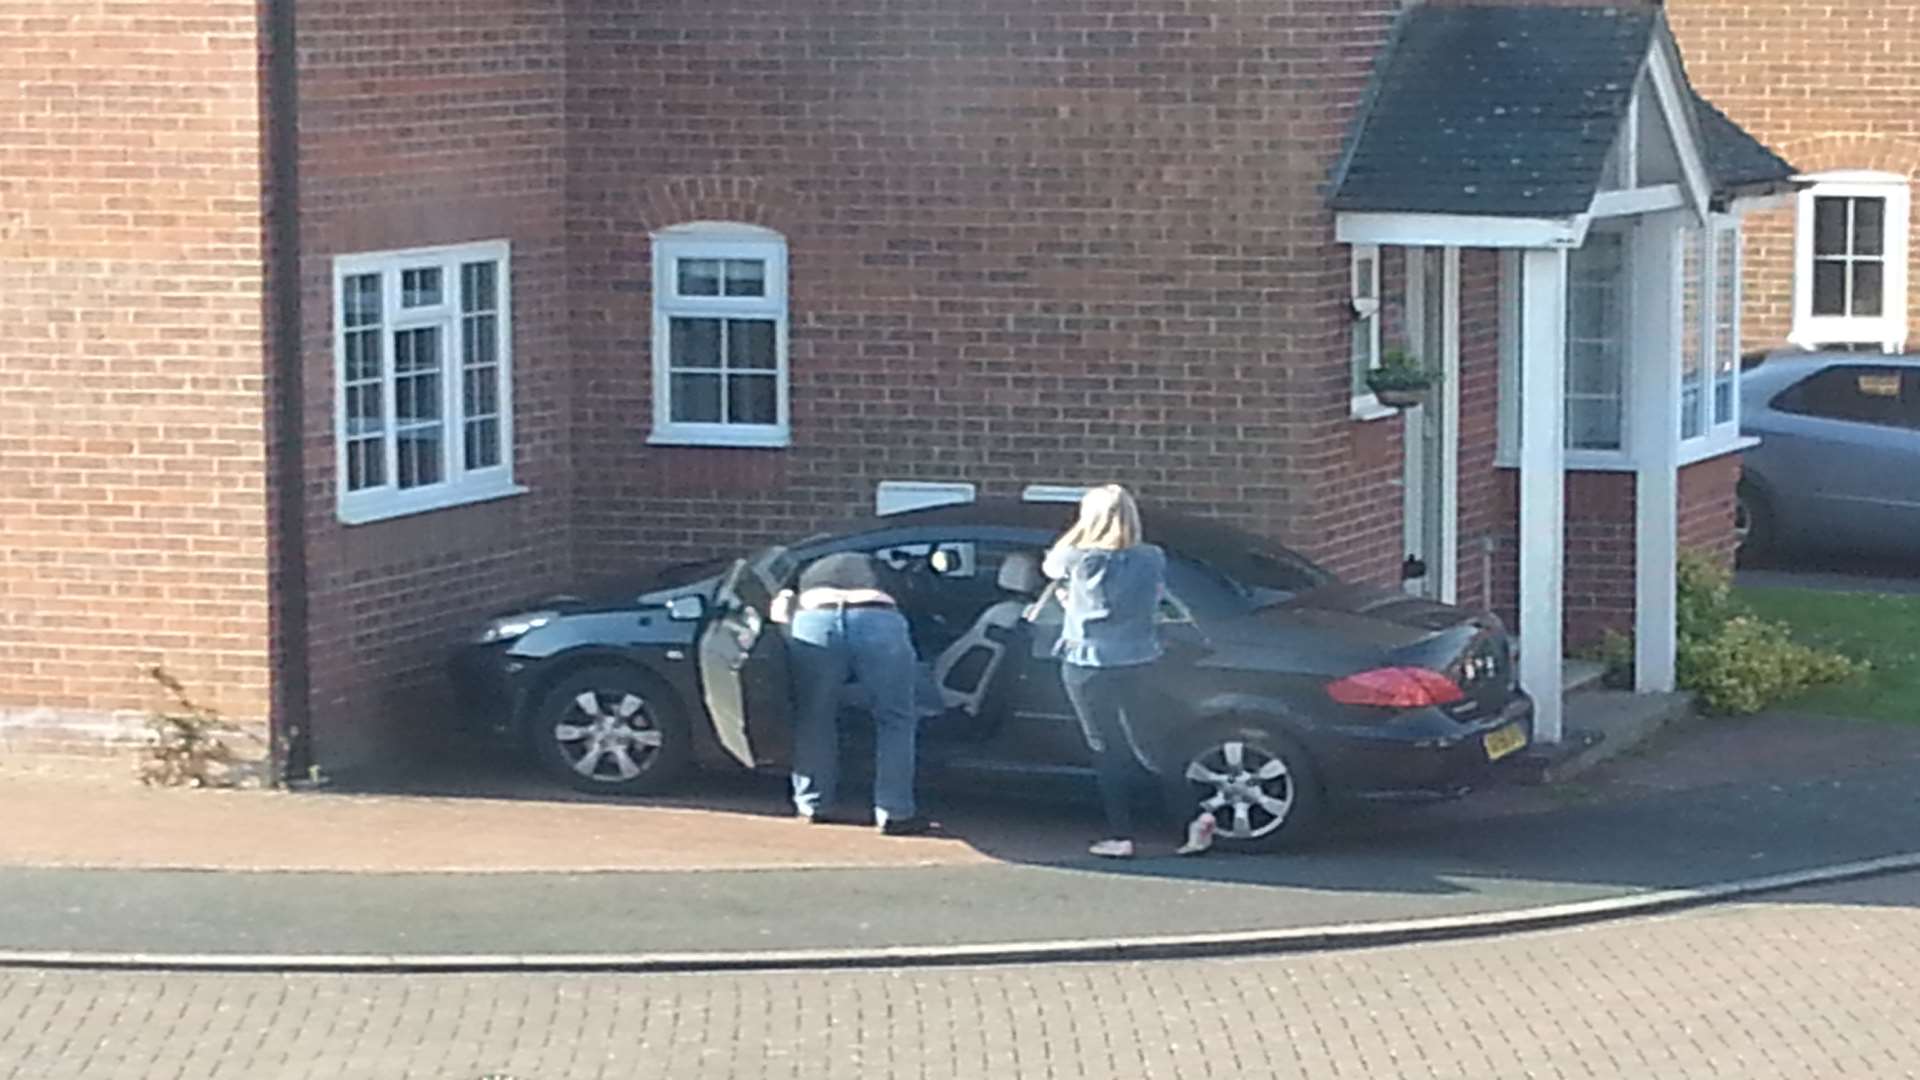 Police search a car owned by the occupants of the house